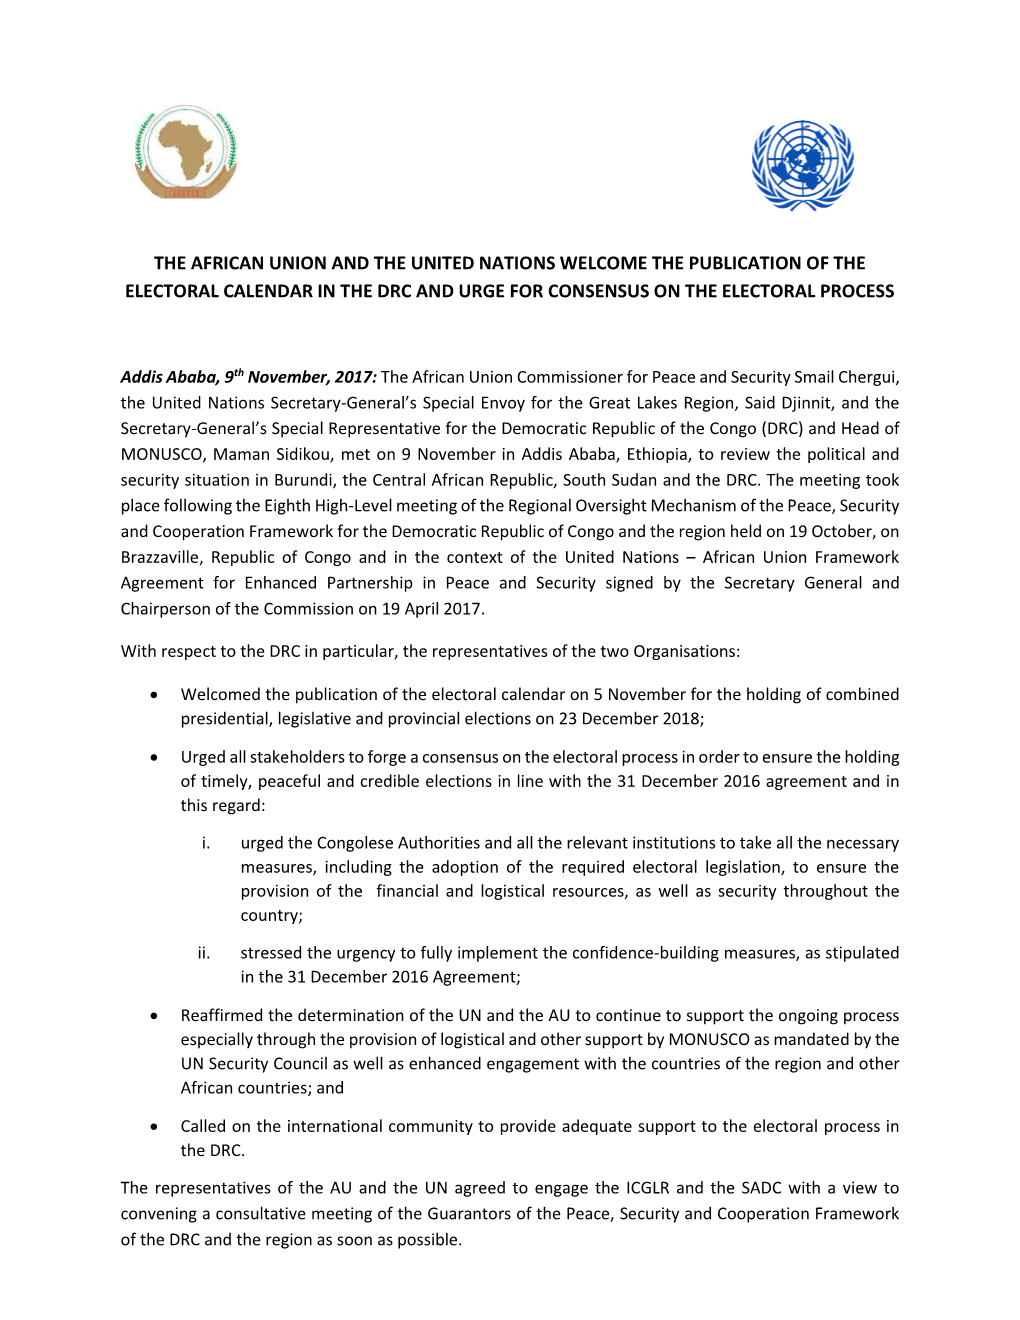 The African Union and the United Nations Welcome the Publication of the Electoral Calendar in the Drc and Urge for Consensus on the Electoral Process